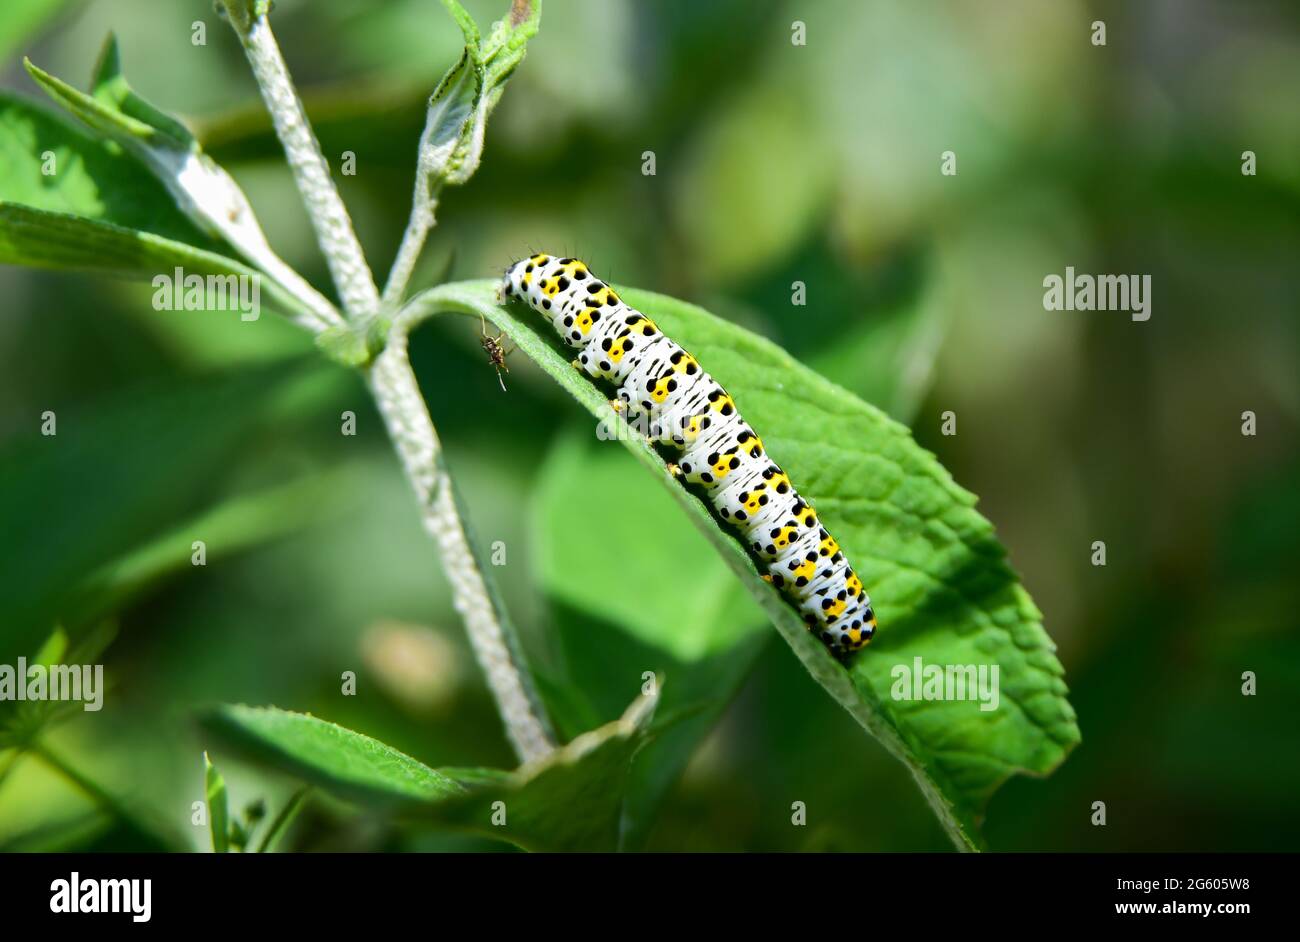 Brighton UK 1st July 2021 - A mullein moth (Cucullia verbasci) caterpillar eating a buddleia plant enjoys the warm sunshine in a Brighton garden today . An infestation of the mullein moth caterpillars can cause devastation to buddleia plants and cause problems to gardeners in Britain   : Credit Simon Dack / Alamy Live News Stock Photo